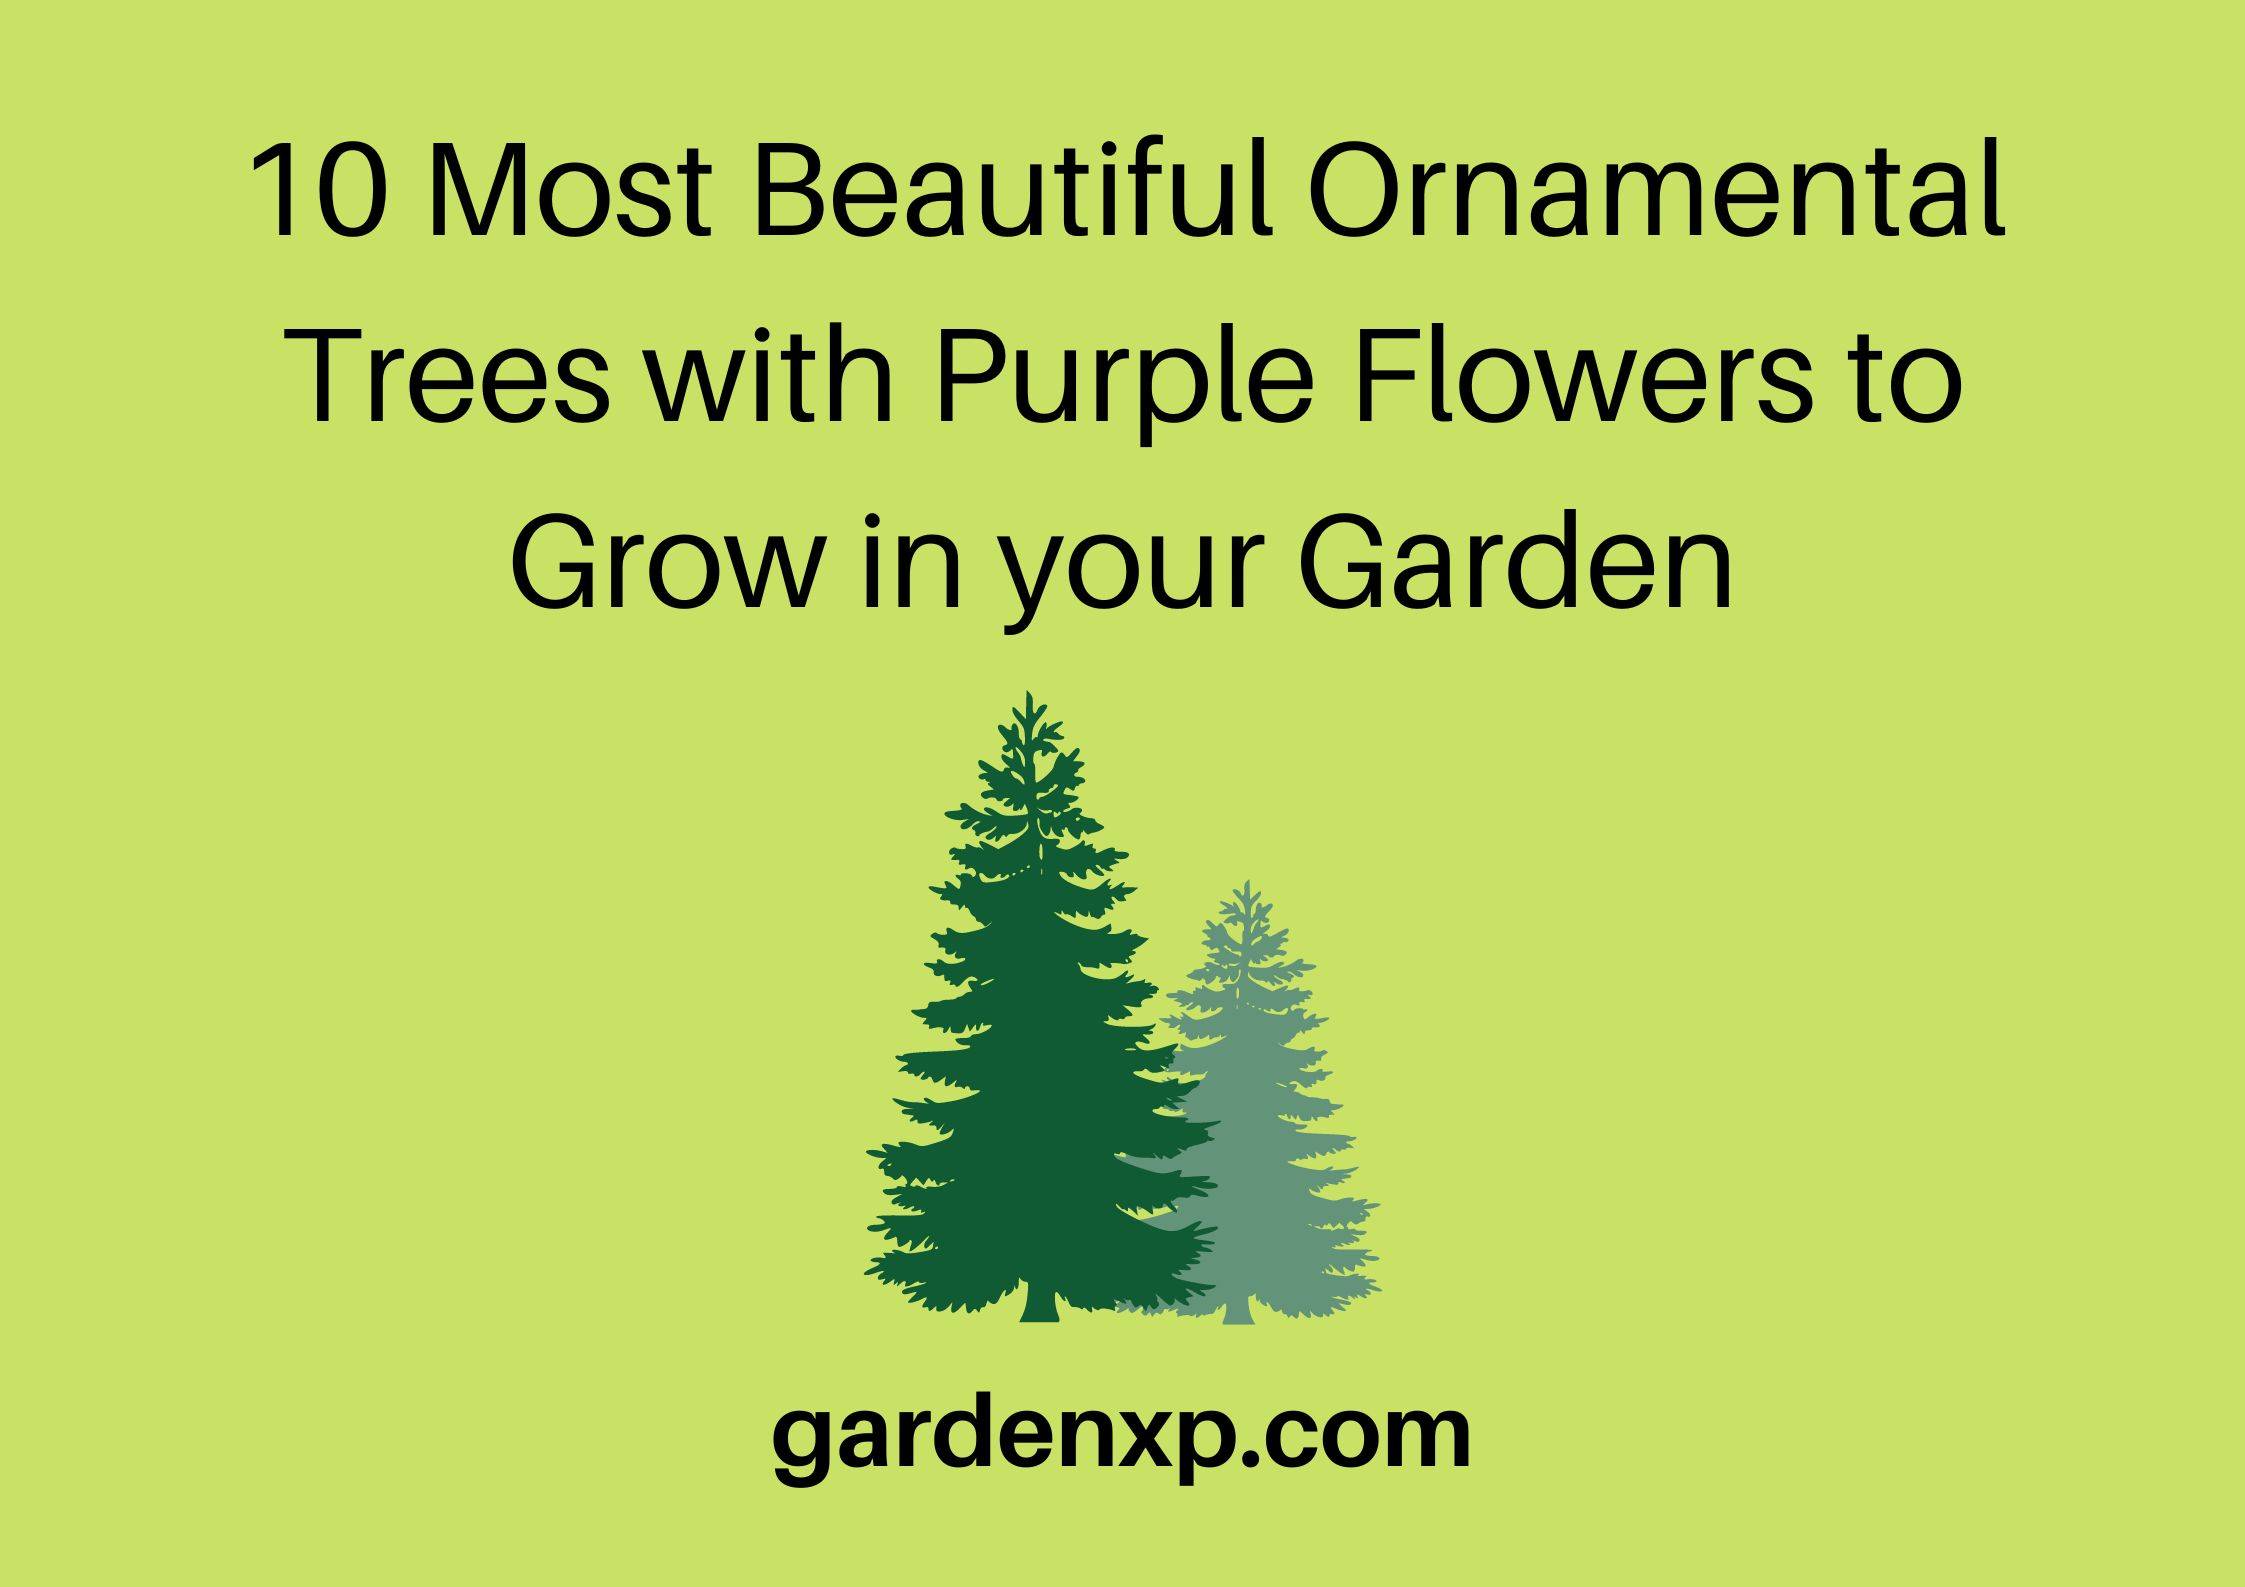 10 Most Beautiful Ornamental Trees with Purple Flowers to Grow in your Garden